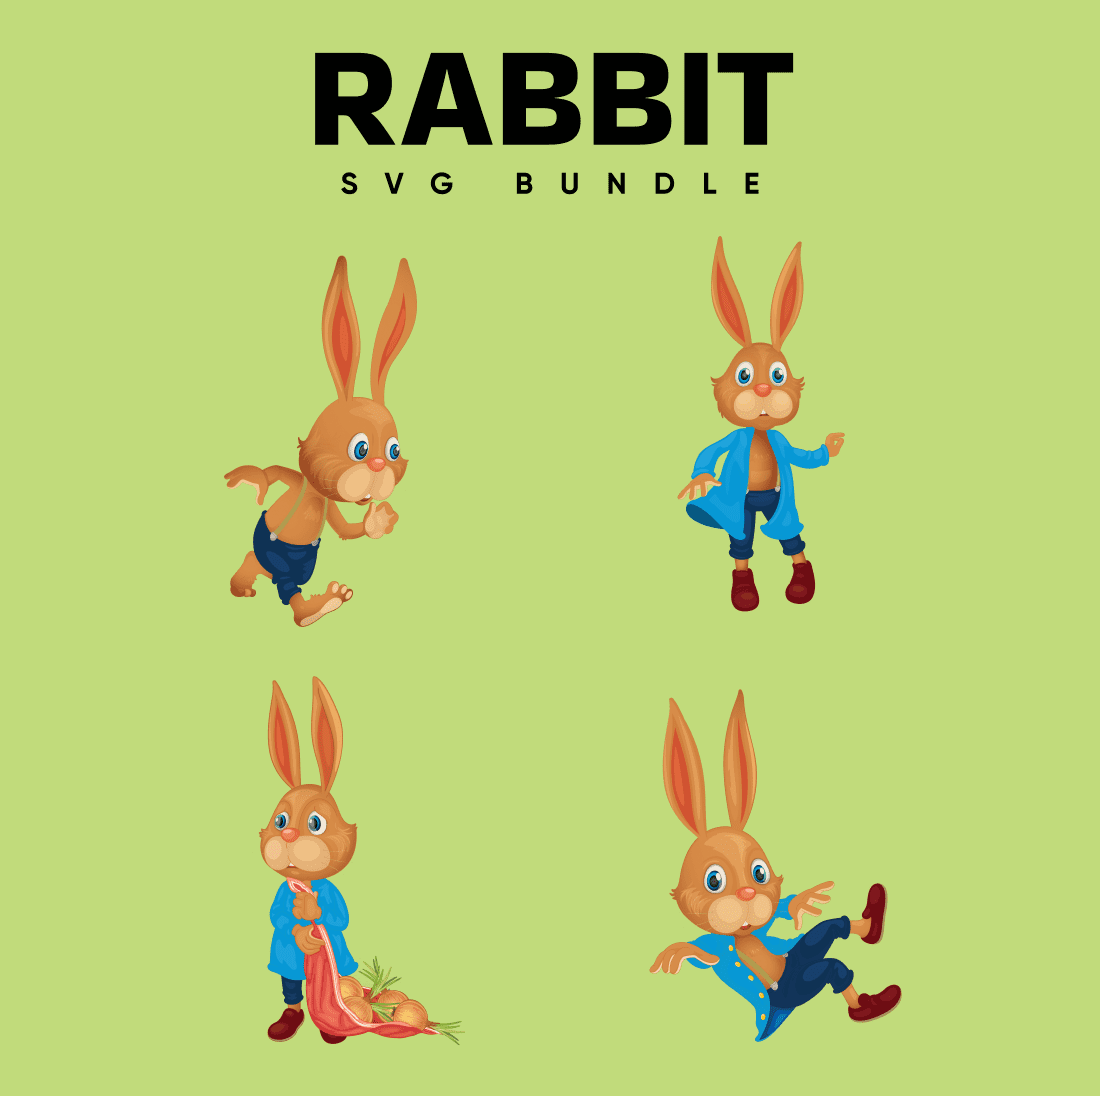 Cartoon rabbit with different poses and expressions.